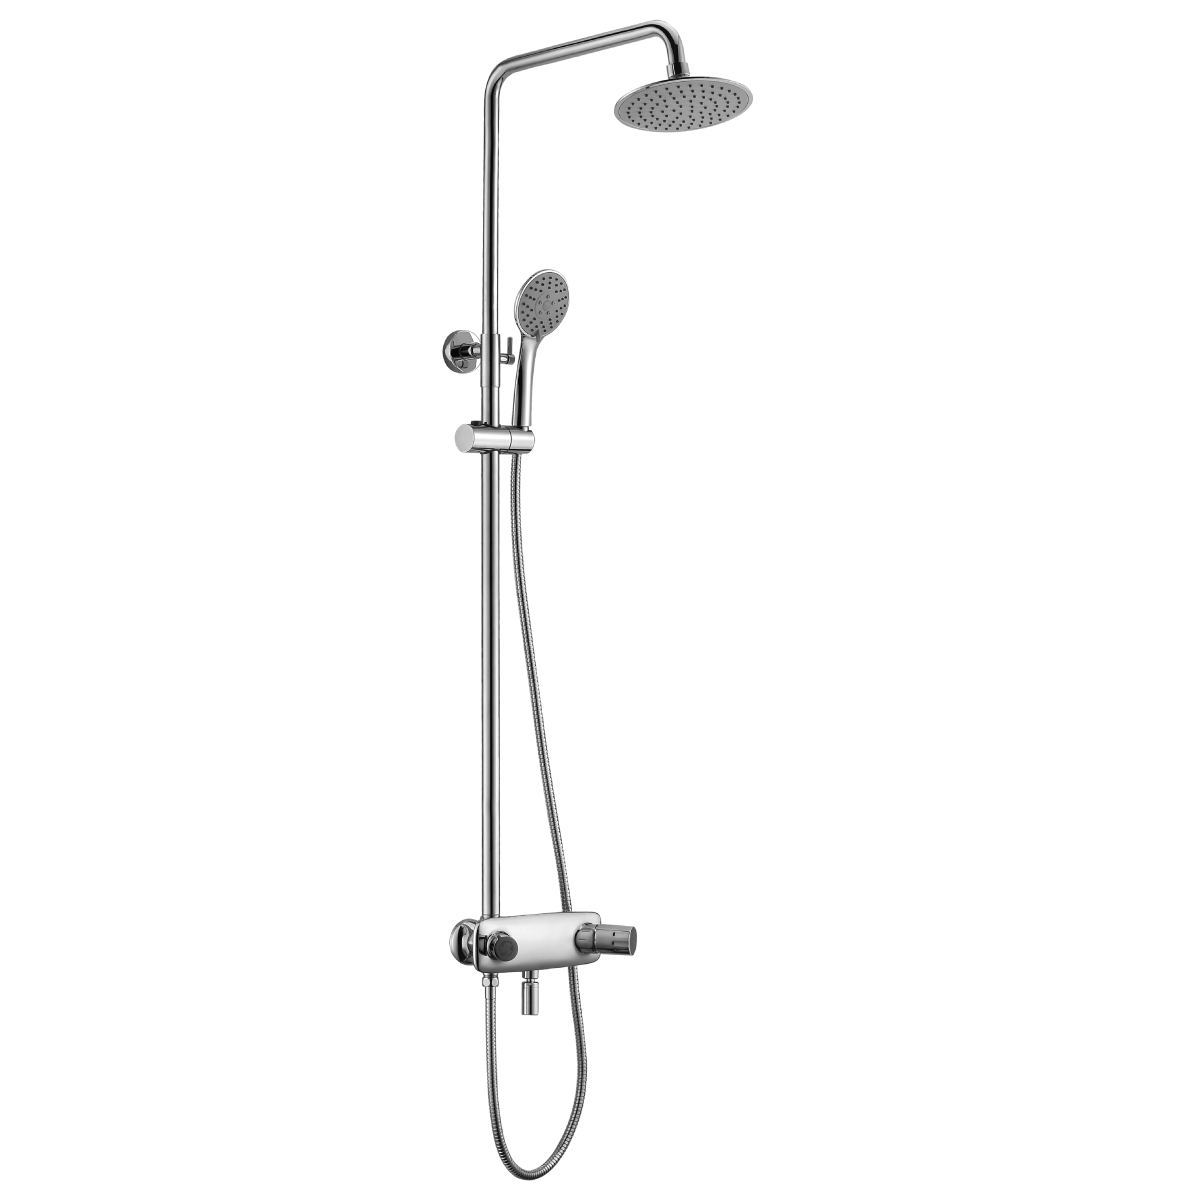 LM5362C Bath and shower faucet with adjustable rod height, swivel spout and «Tropical rain» shower head